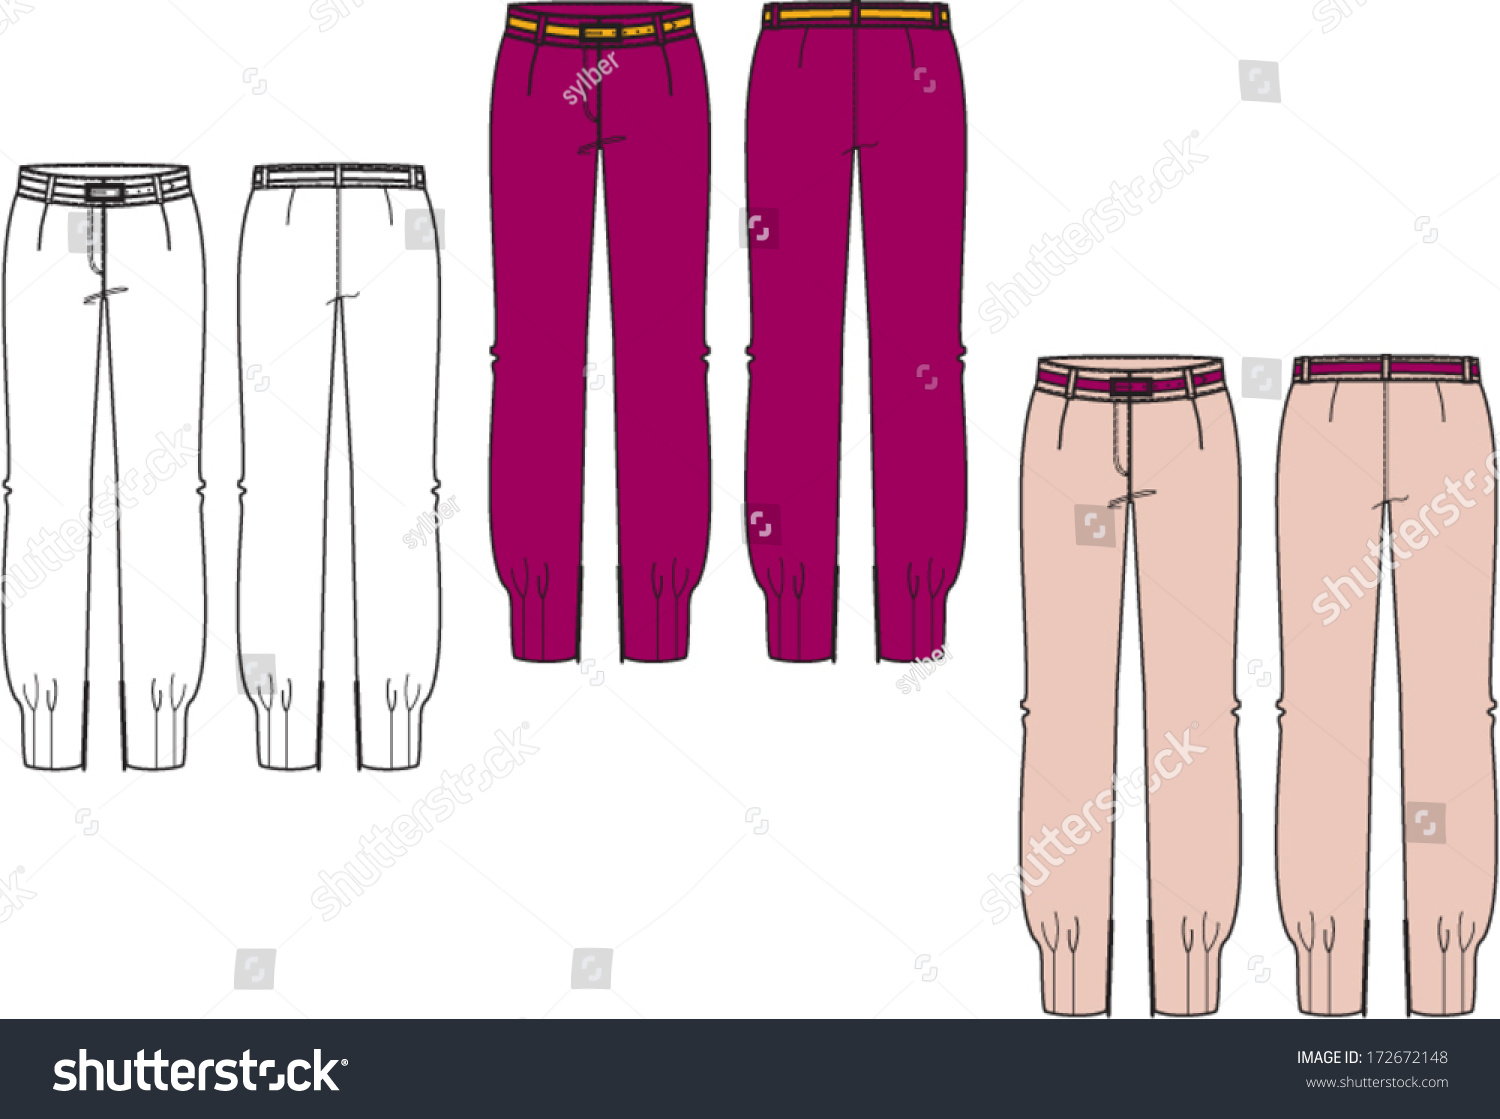 Technical Vector Drawing Of Woman'S Trousers - 172672148 : Shutterstock